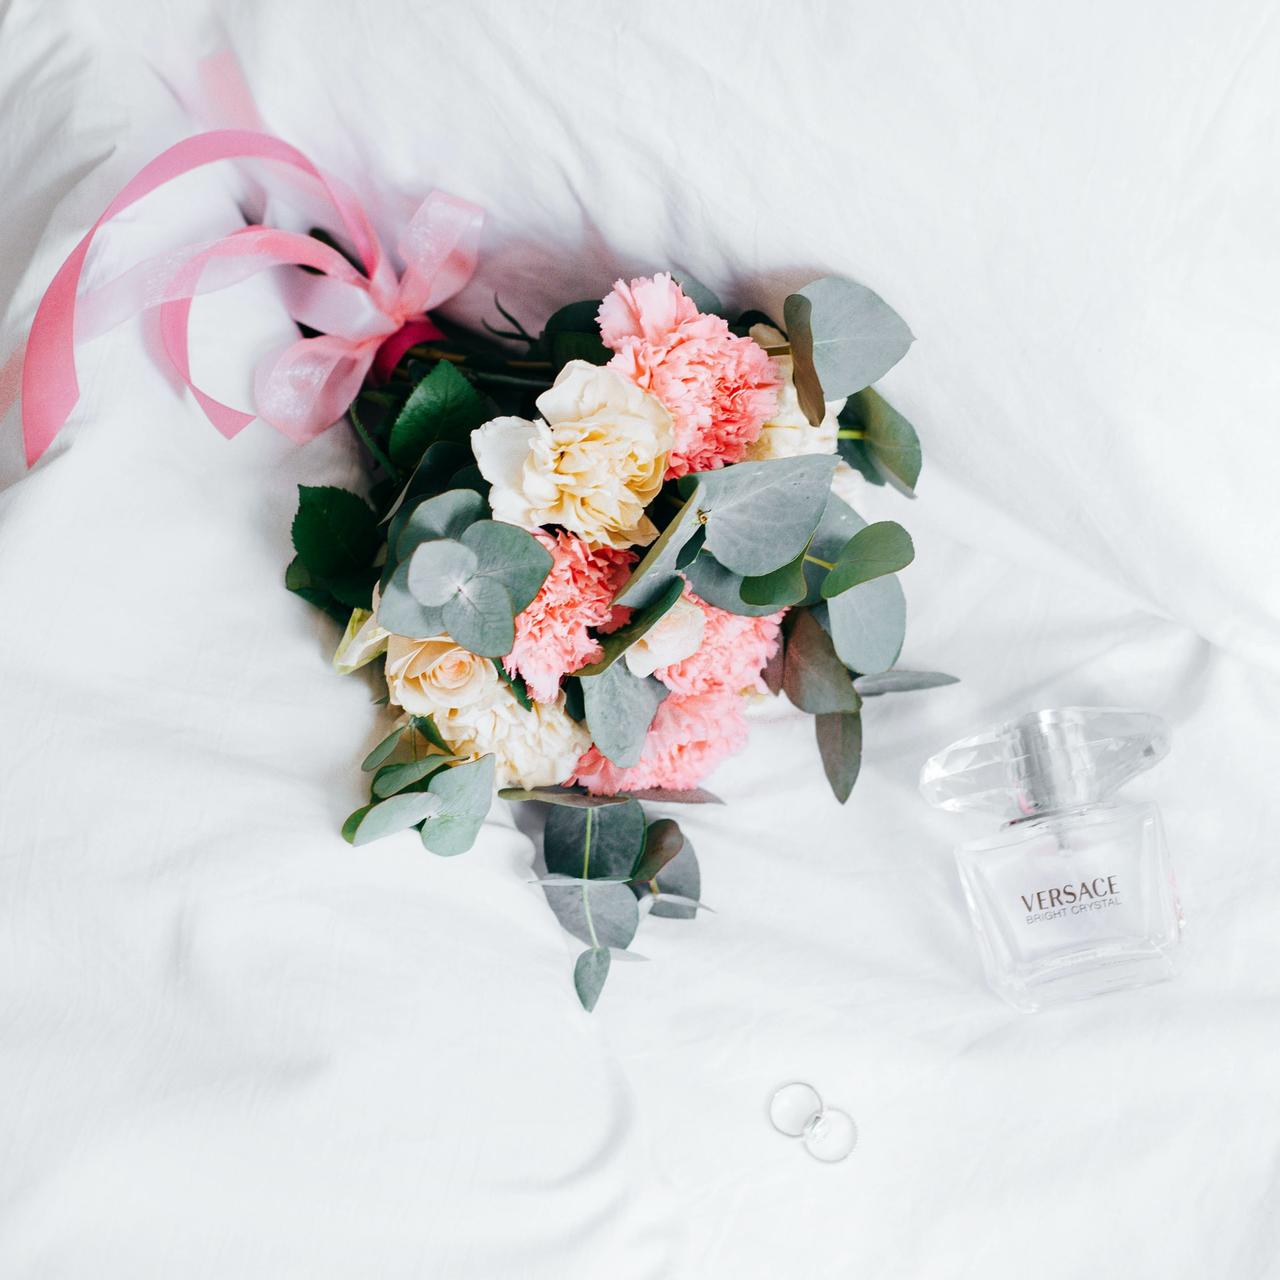 The Best Wedding Perfume for Your Bridal Style